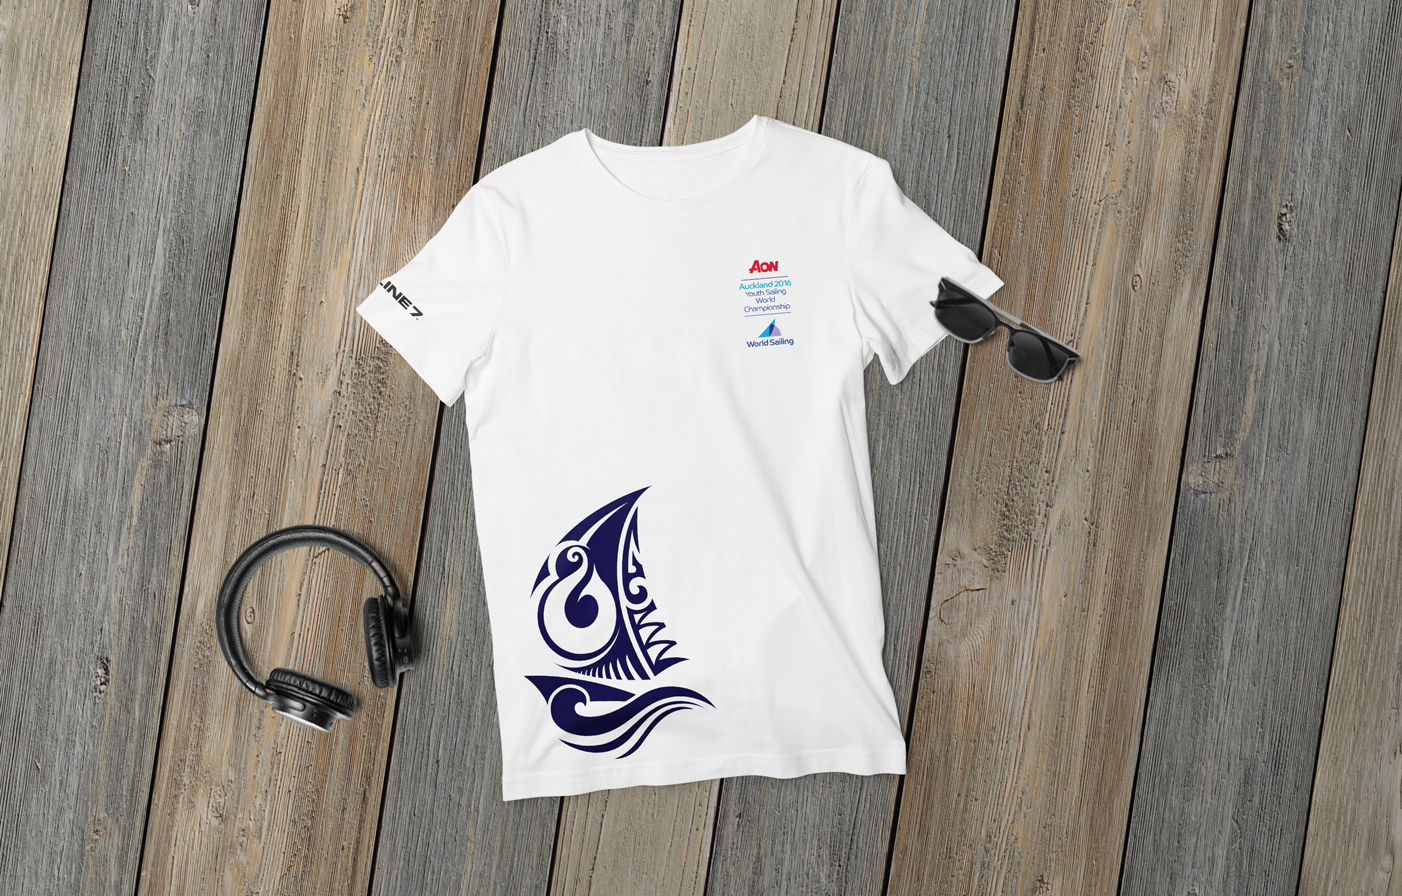 L7 Marine Youth World Sailing Champs 2016 - Limited Edition Gear Design